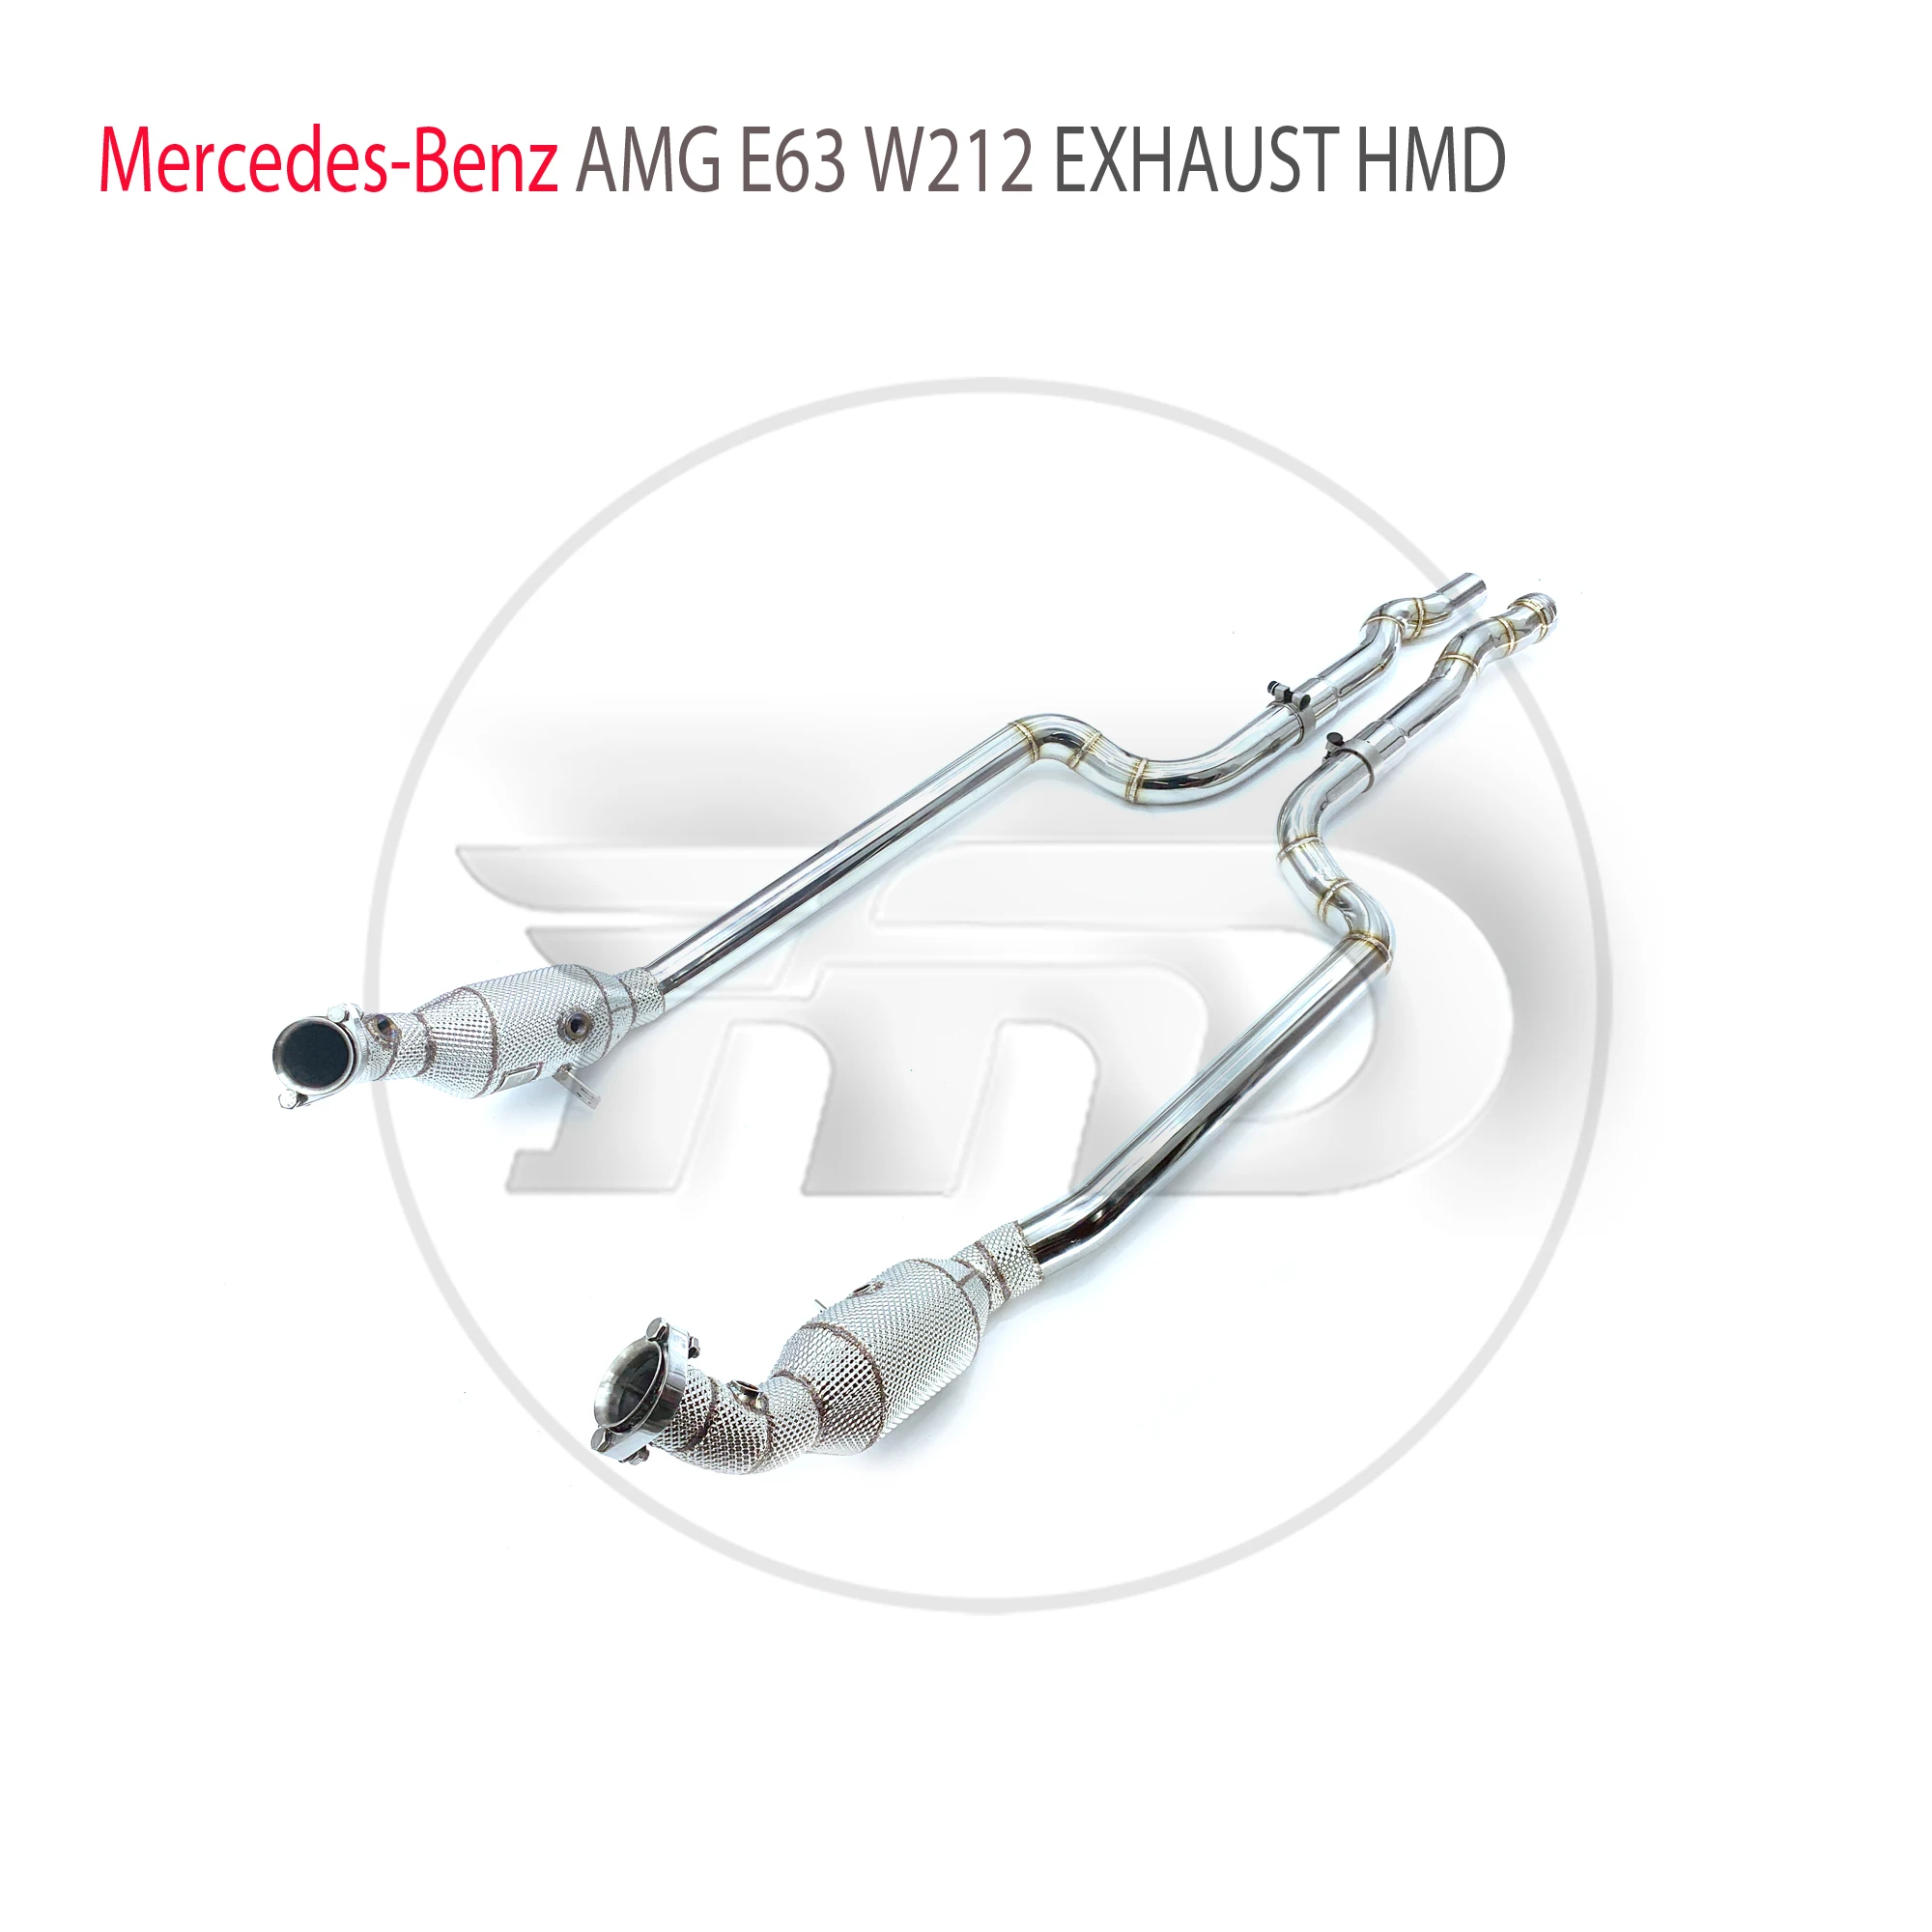 

HMD Exhaust System High Flow Performance Downpipe for Mercedes Benz AMG E63 W212 Racing Test Pipe